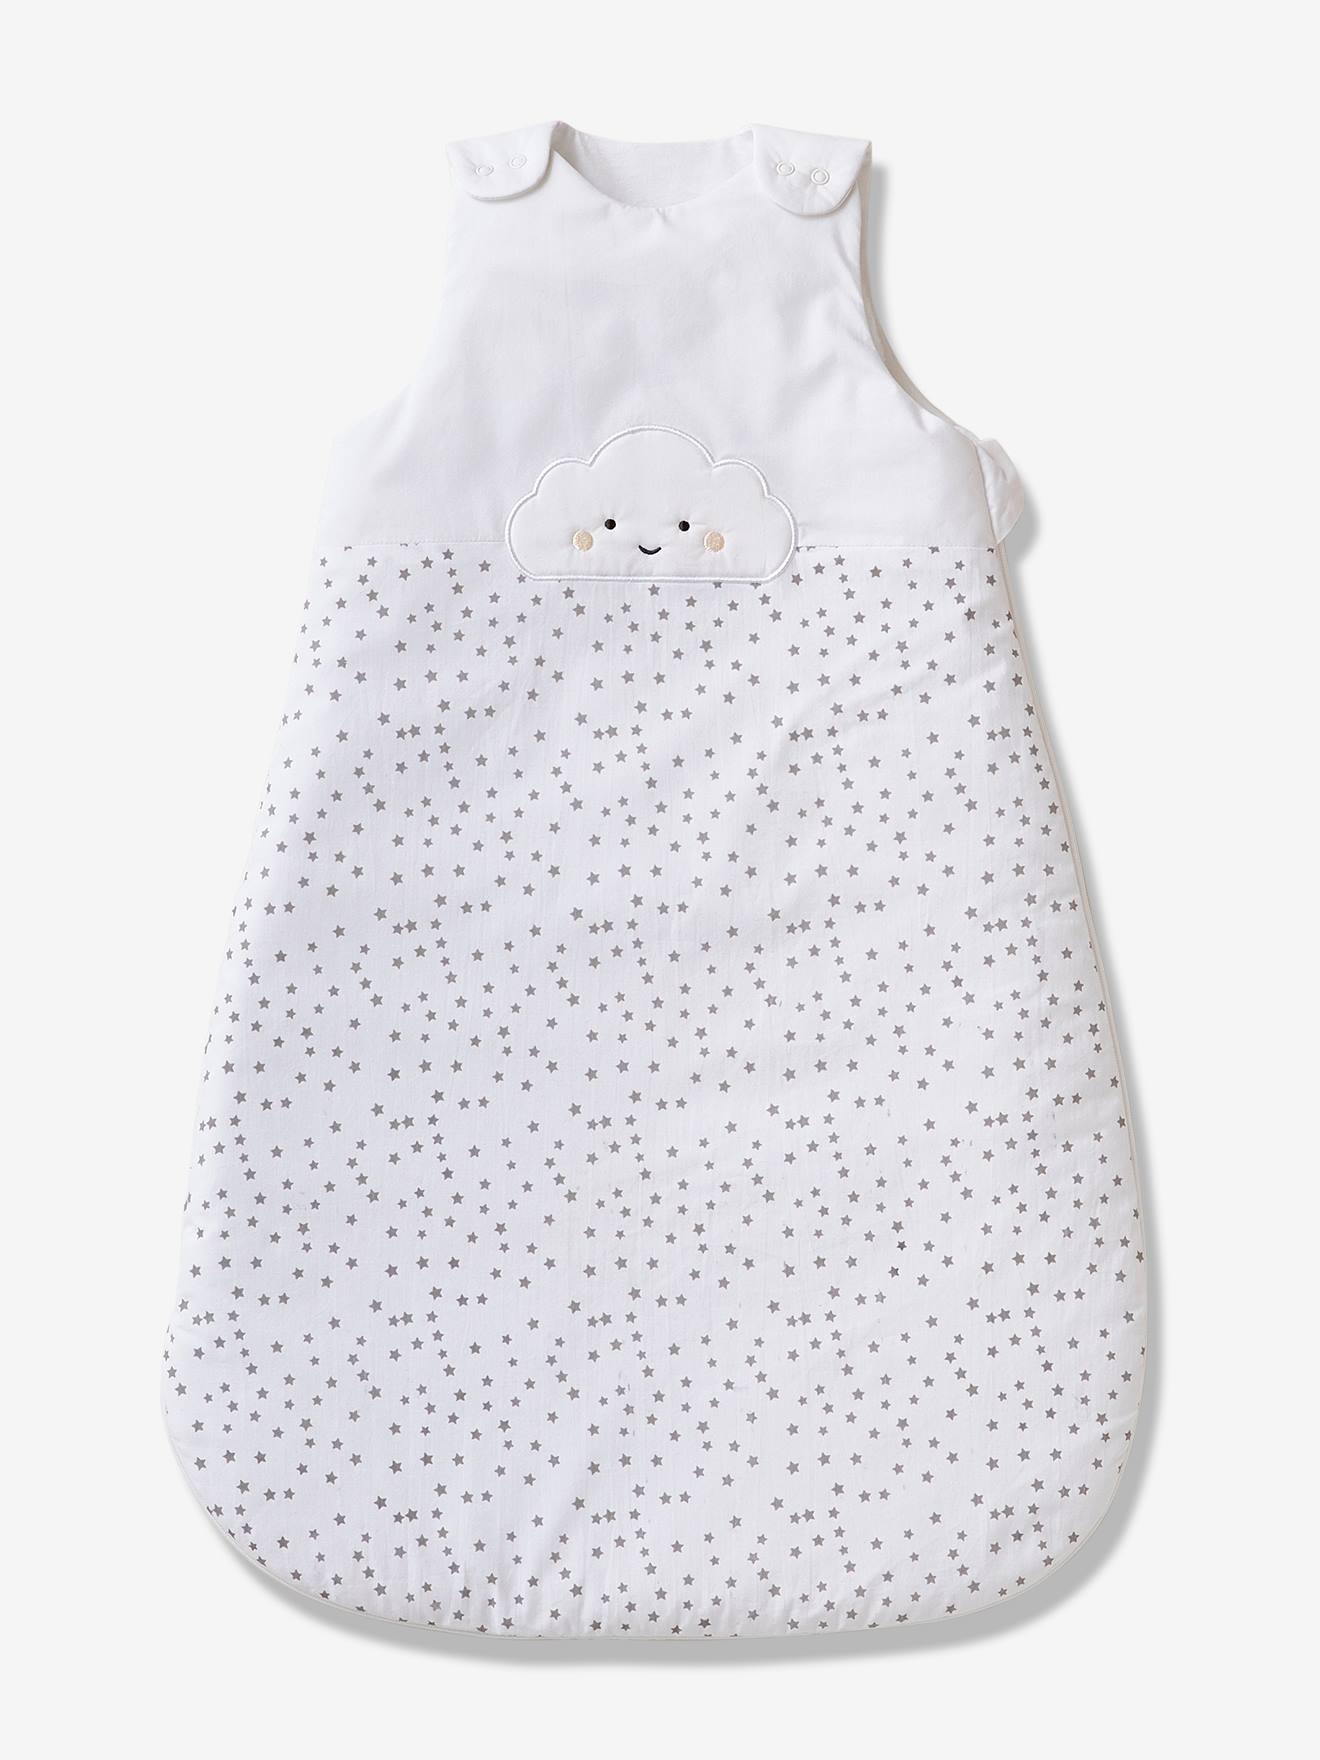 50 cms Length Collection Little Sweet Dreams Any Seasons Ptit Basile Small Sleeping Bag for Premature Baby or Infant 0-1 Months Cotton stemming from The Organic Farming 